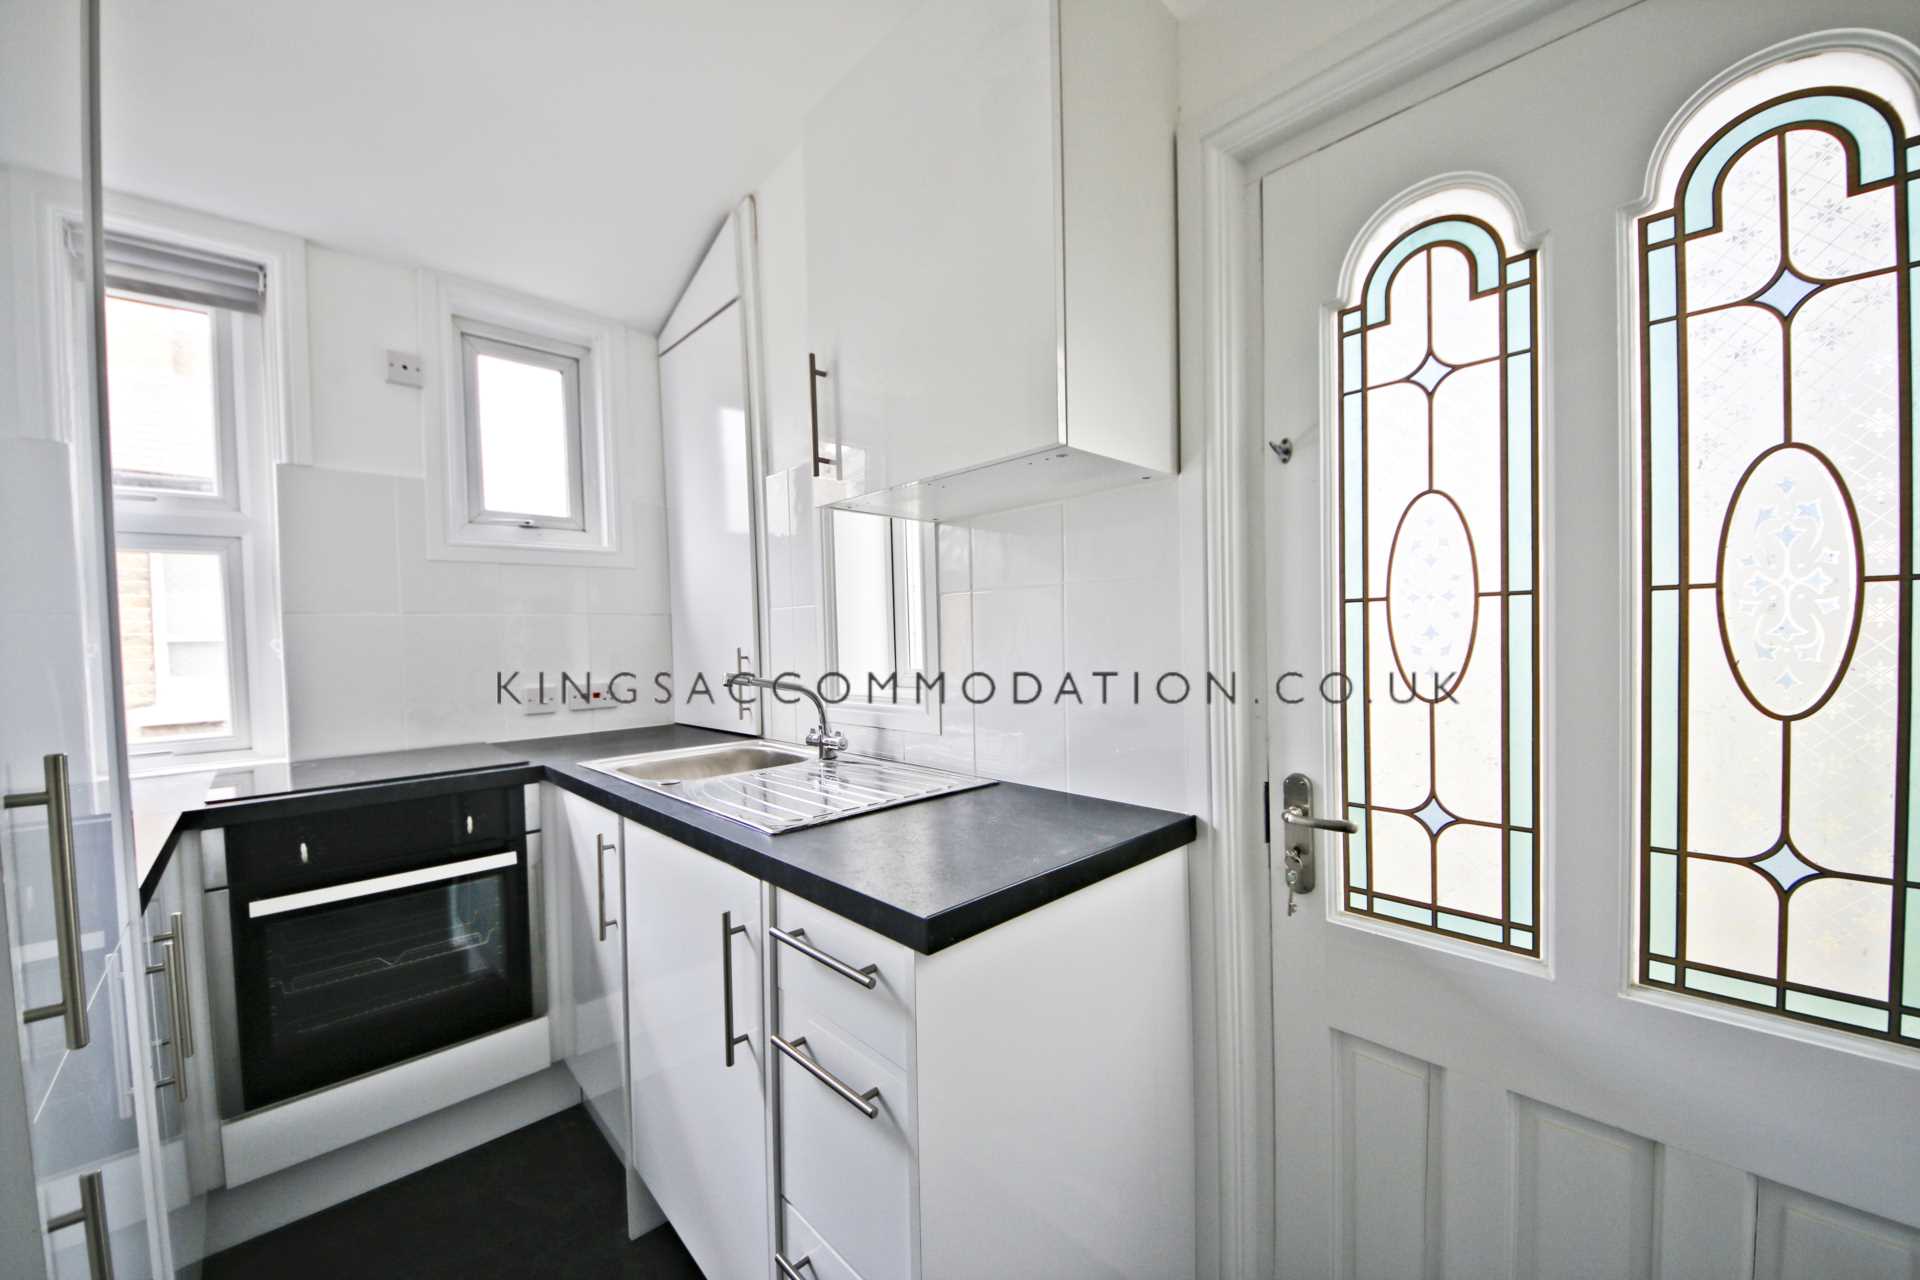 2 bed Maisonette for rent in London. From Kings Accommodation